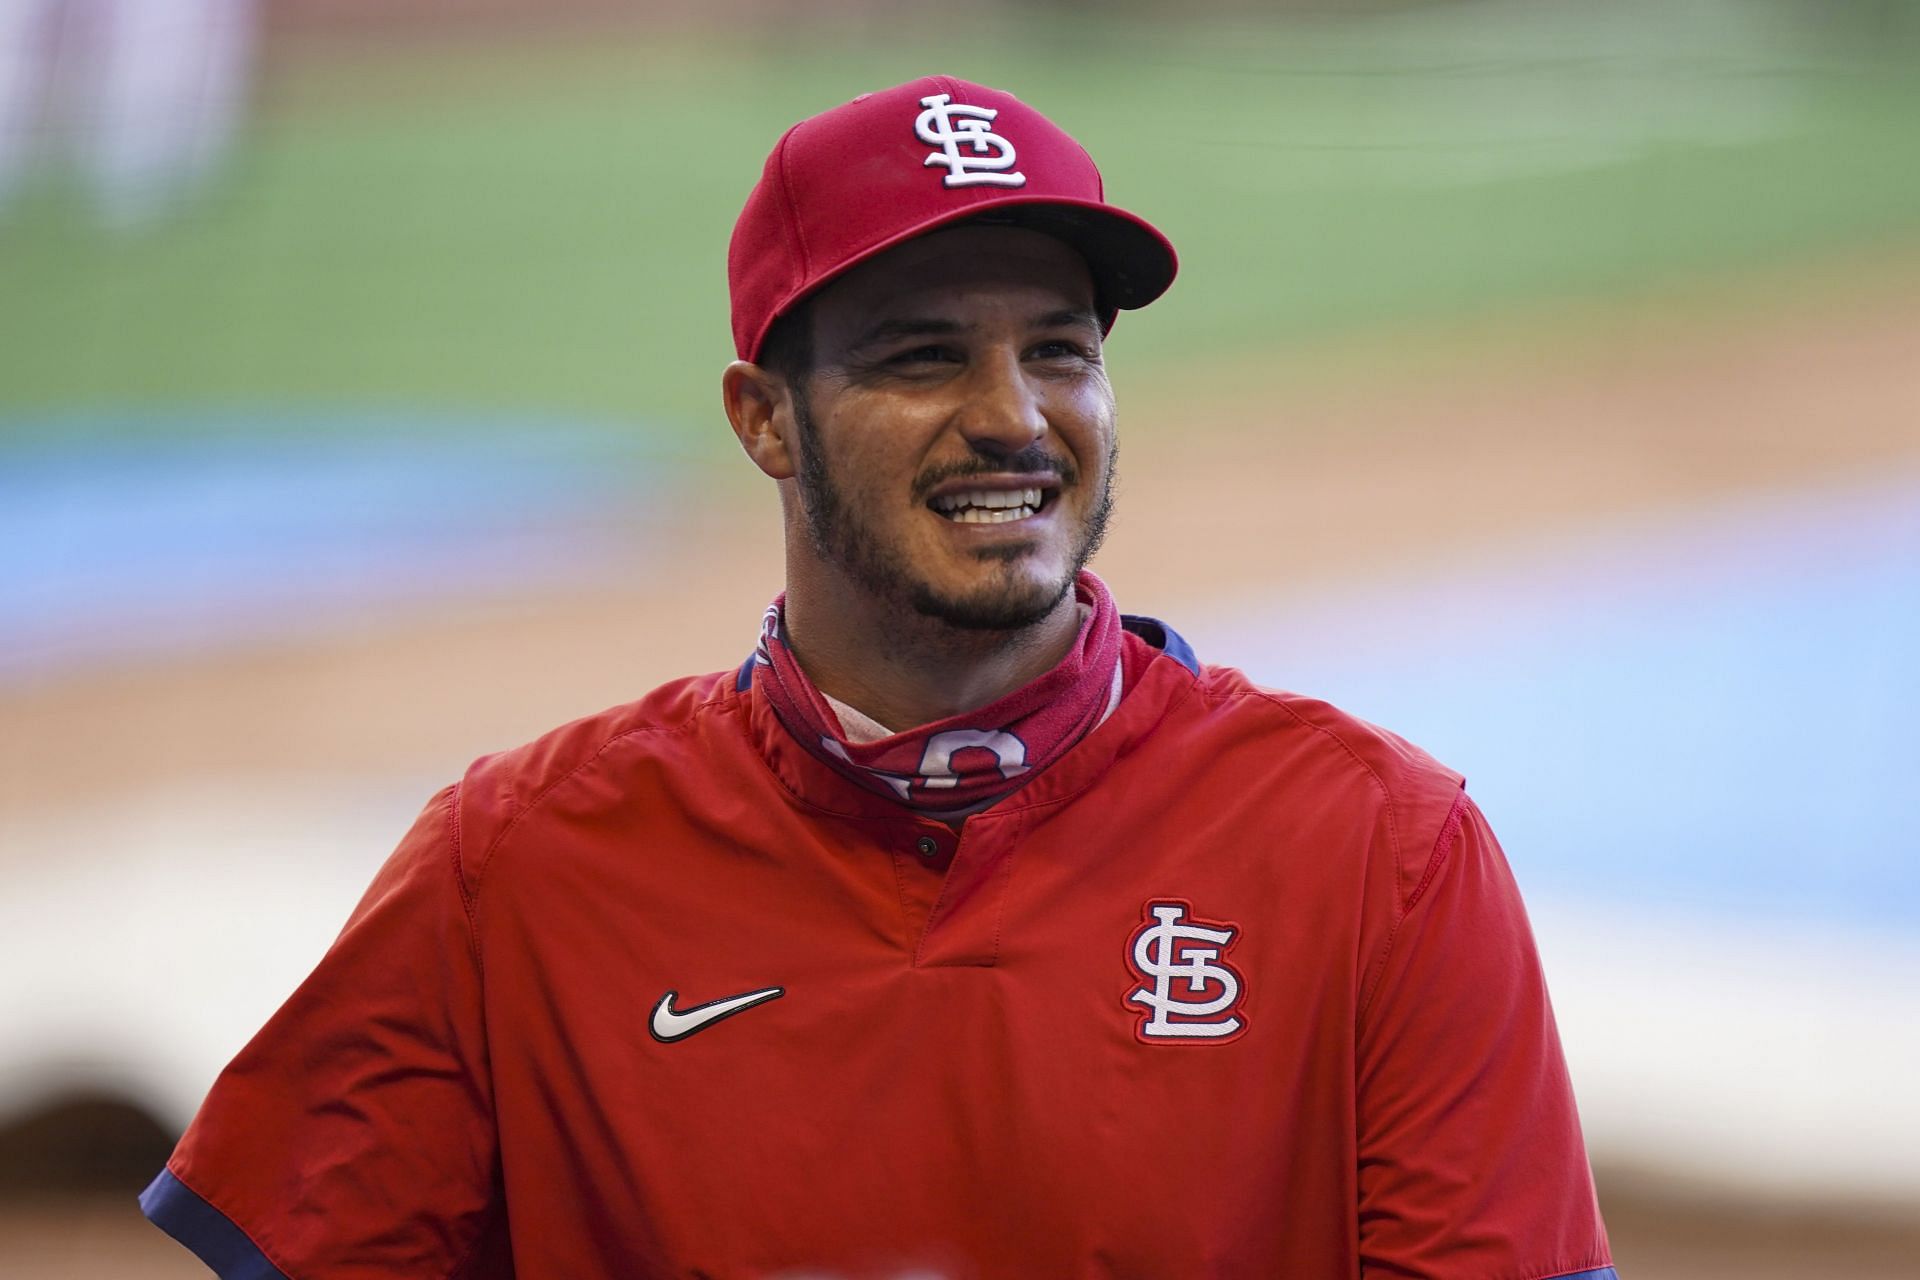 St Louis Cardinals third baseman Arenado is not popular with the New York Mets fanbase.